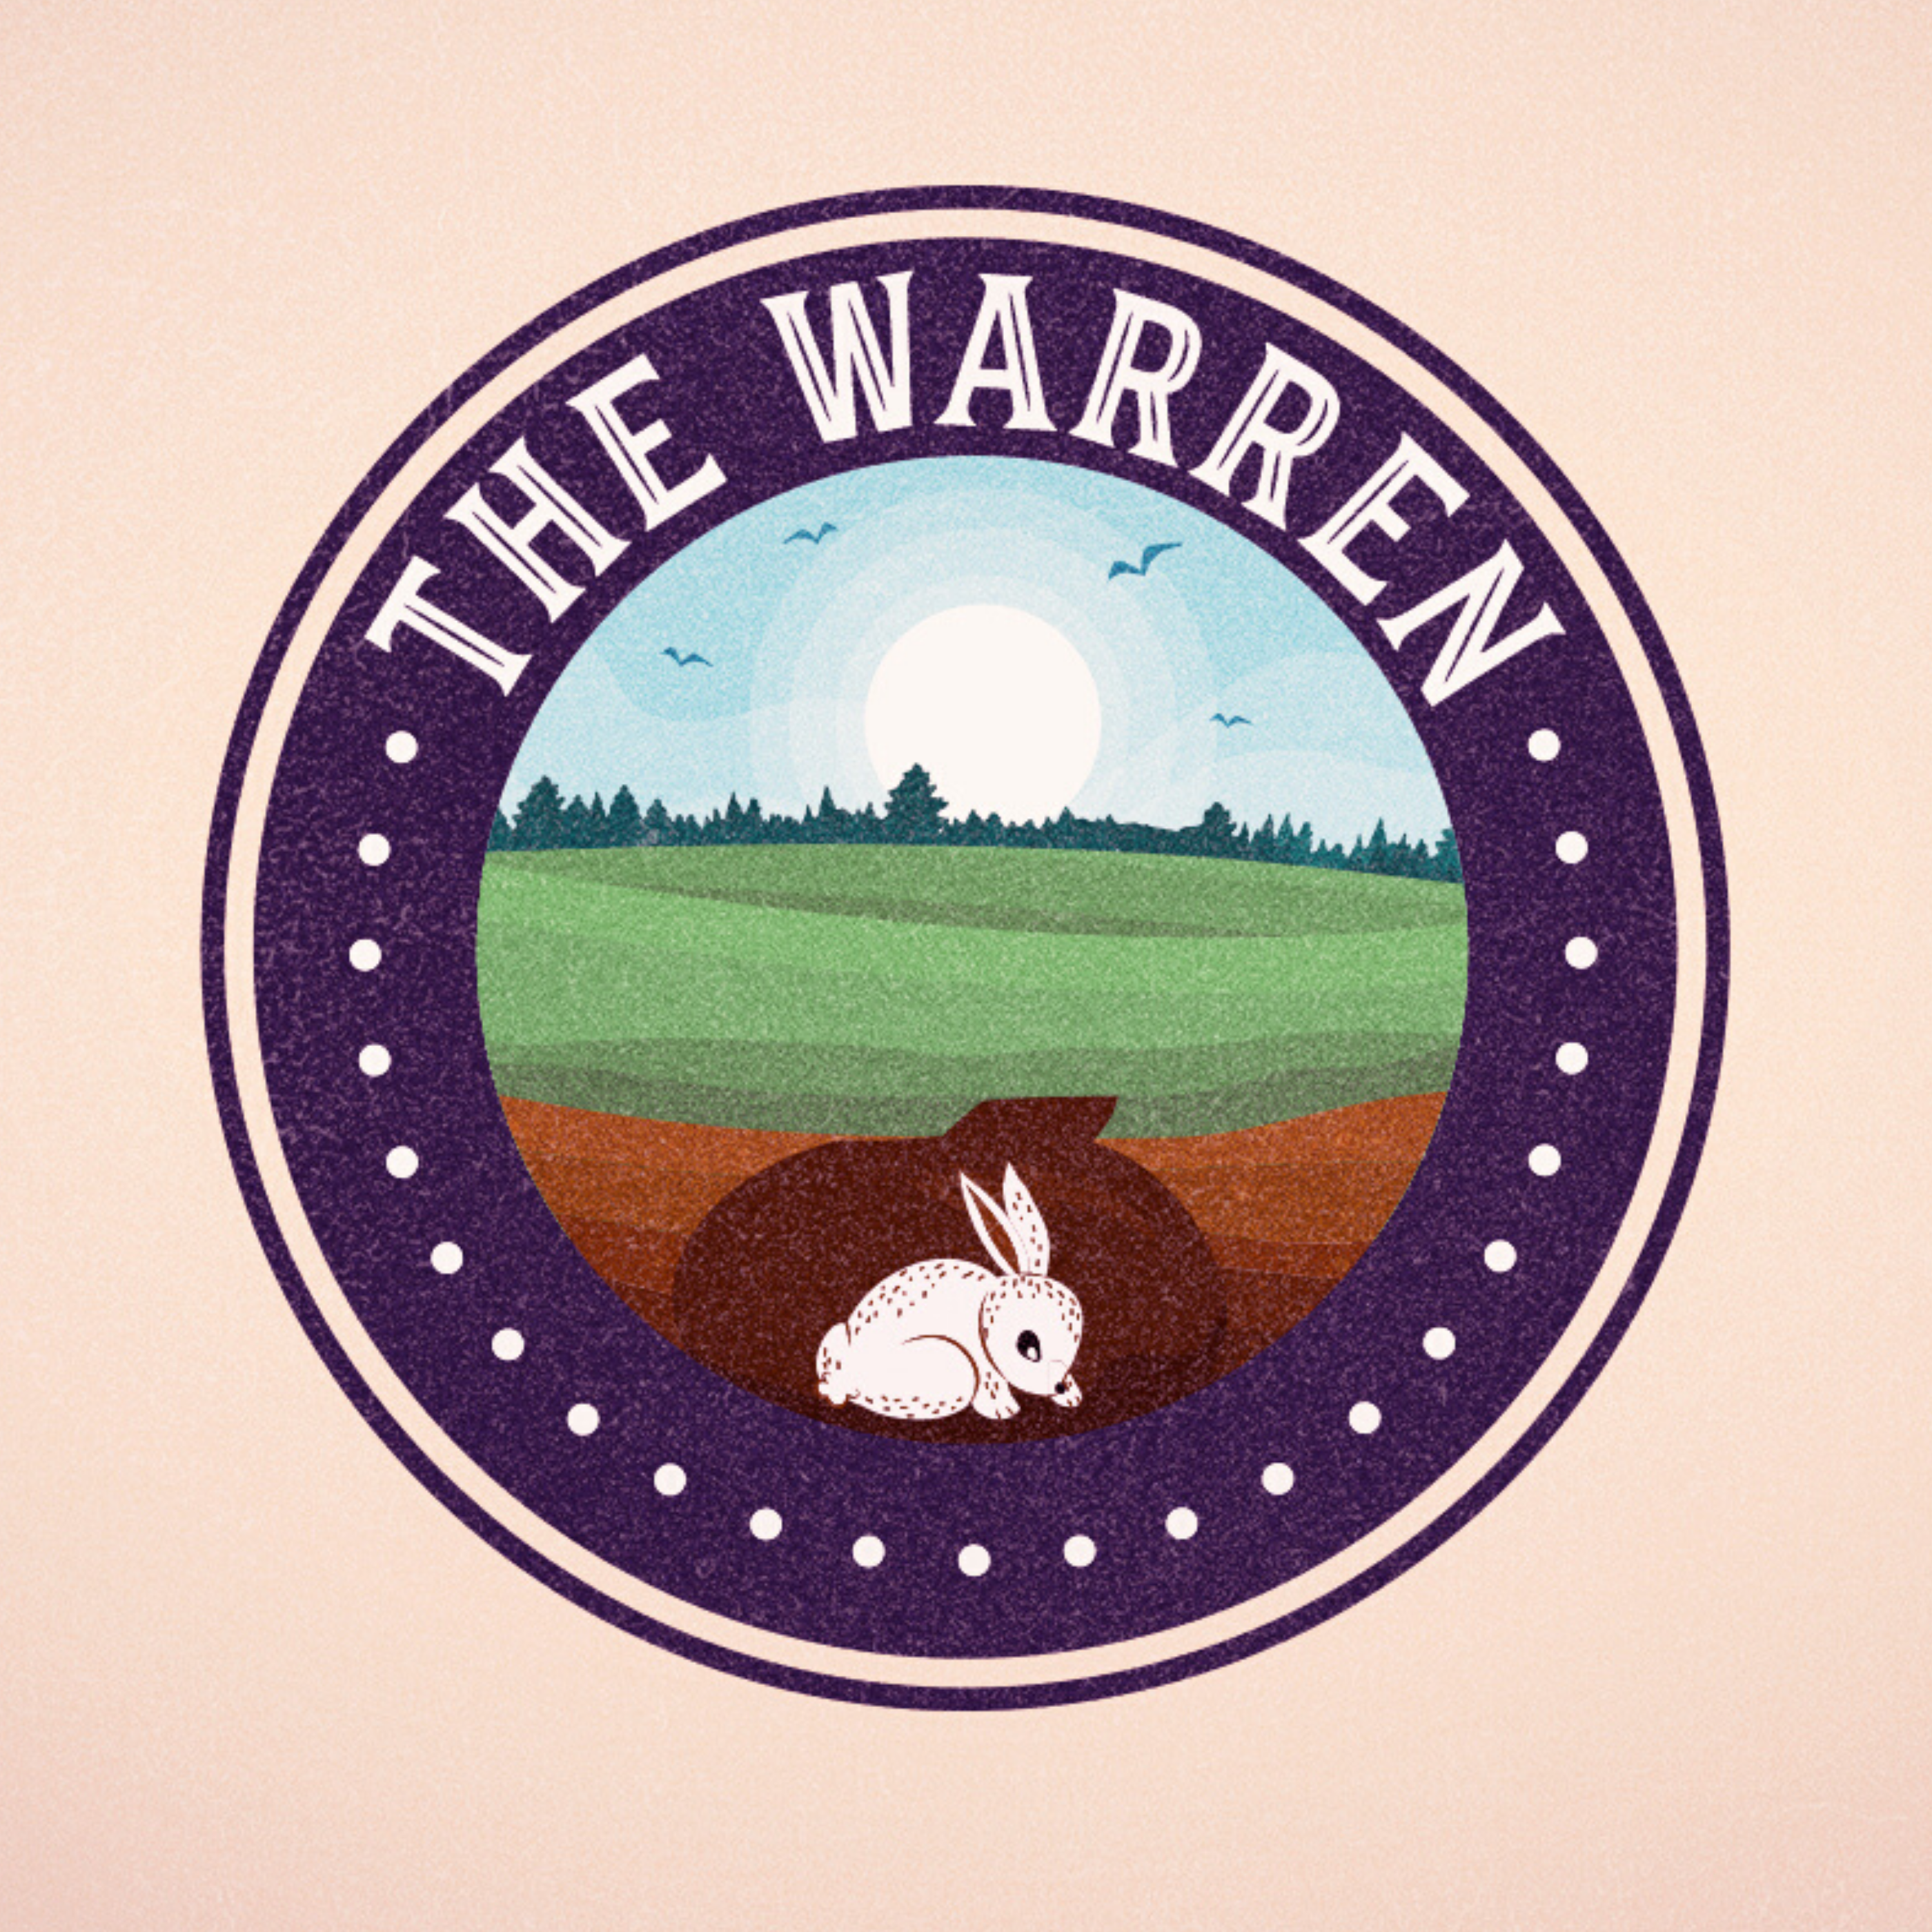 Welcome to The Warren